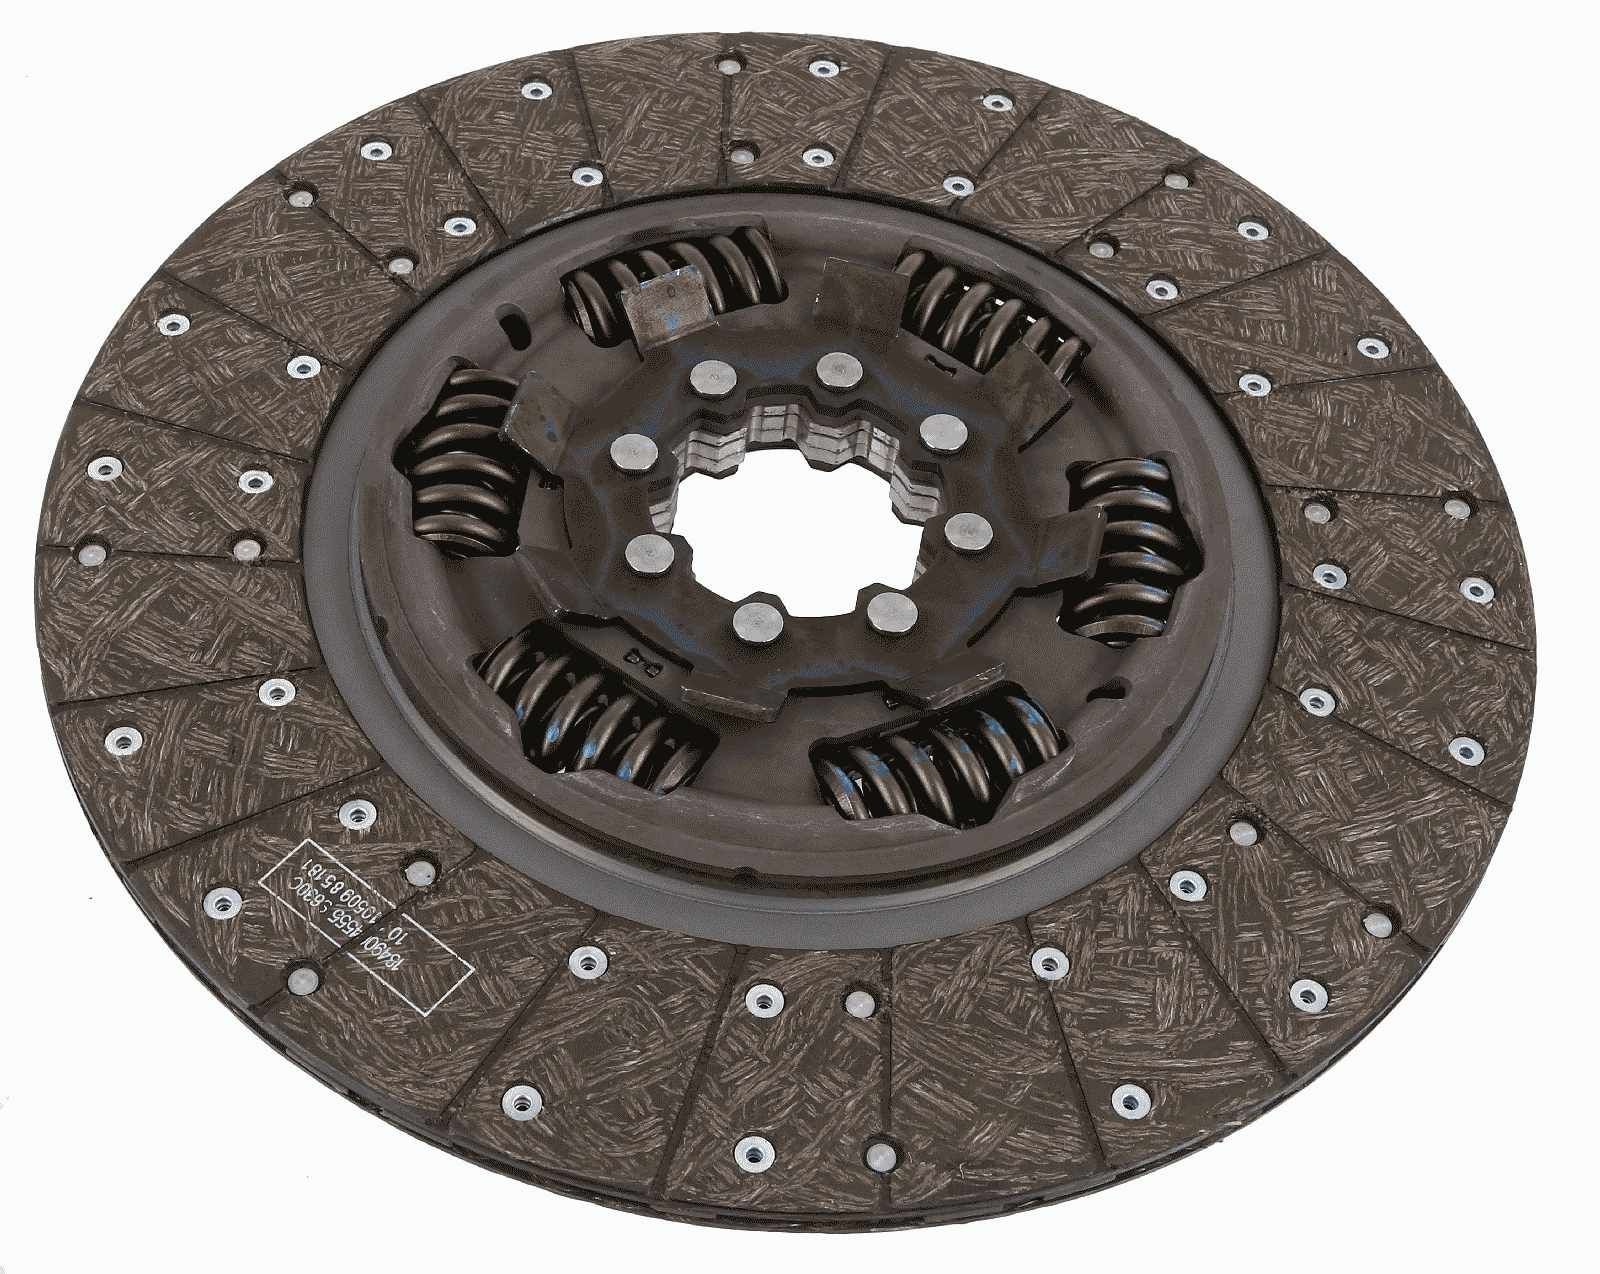 SACHS 1878 009 819 Clutch Disc 400mm, Number of Teeth: 8, transmission sided